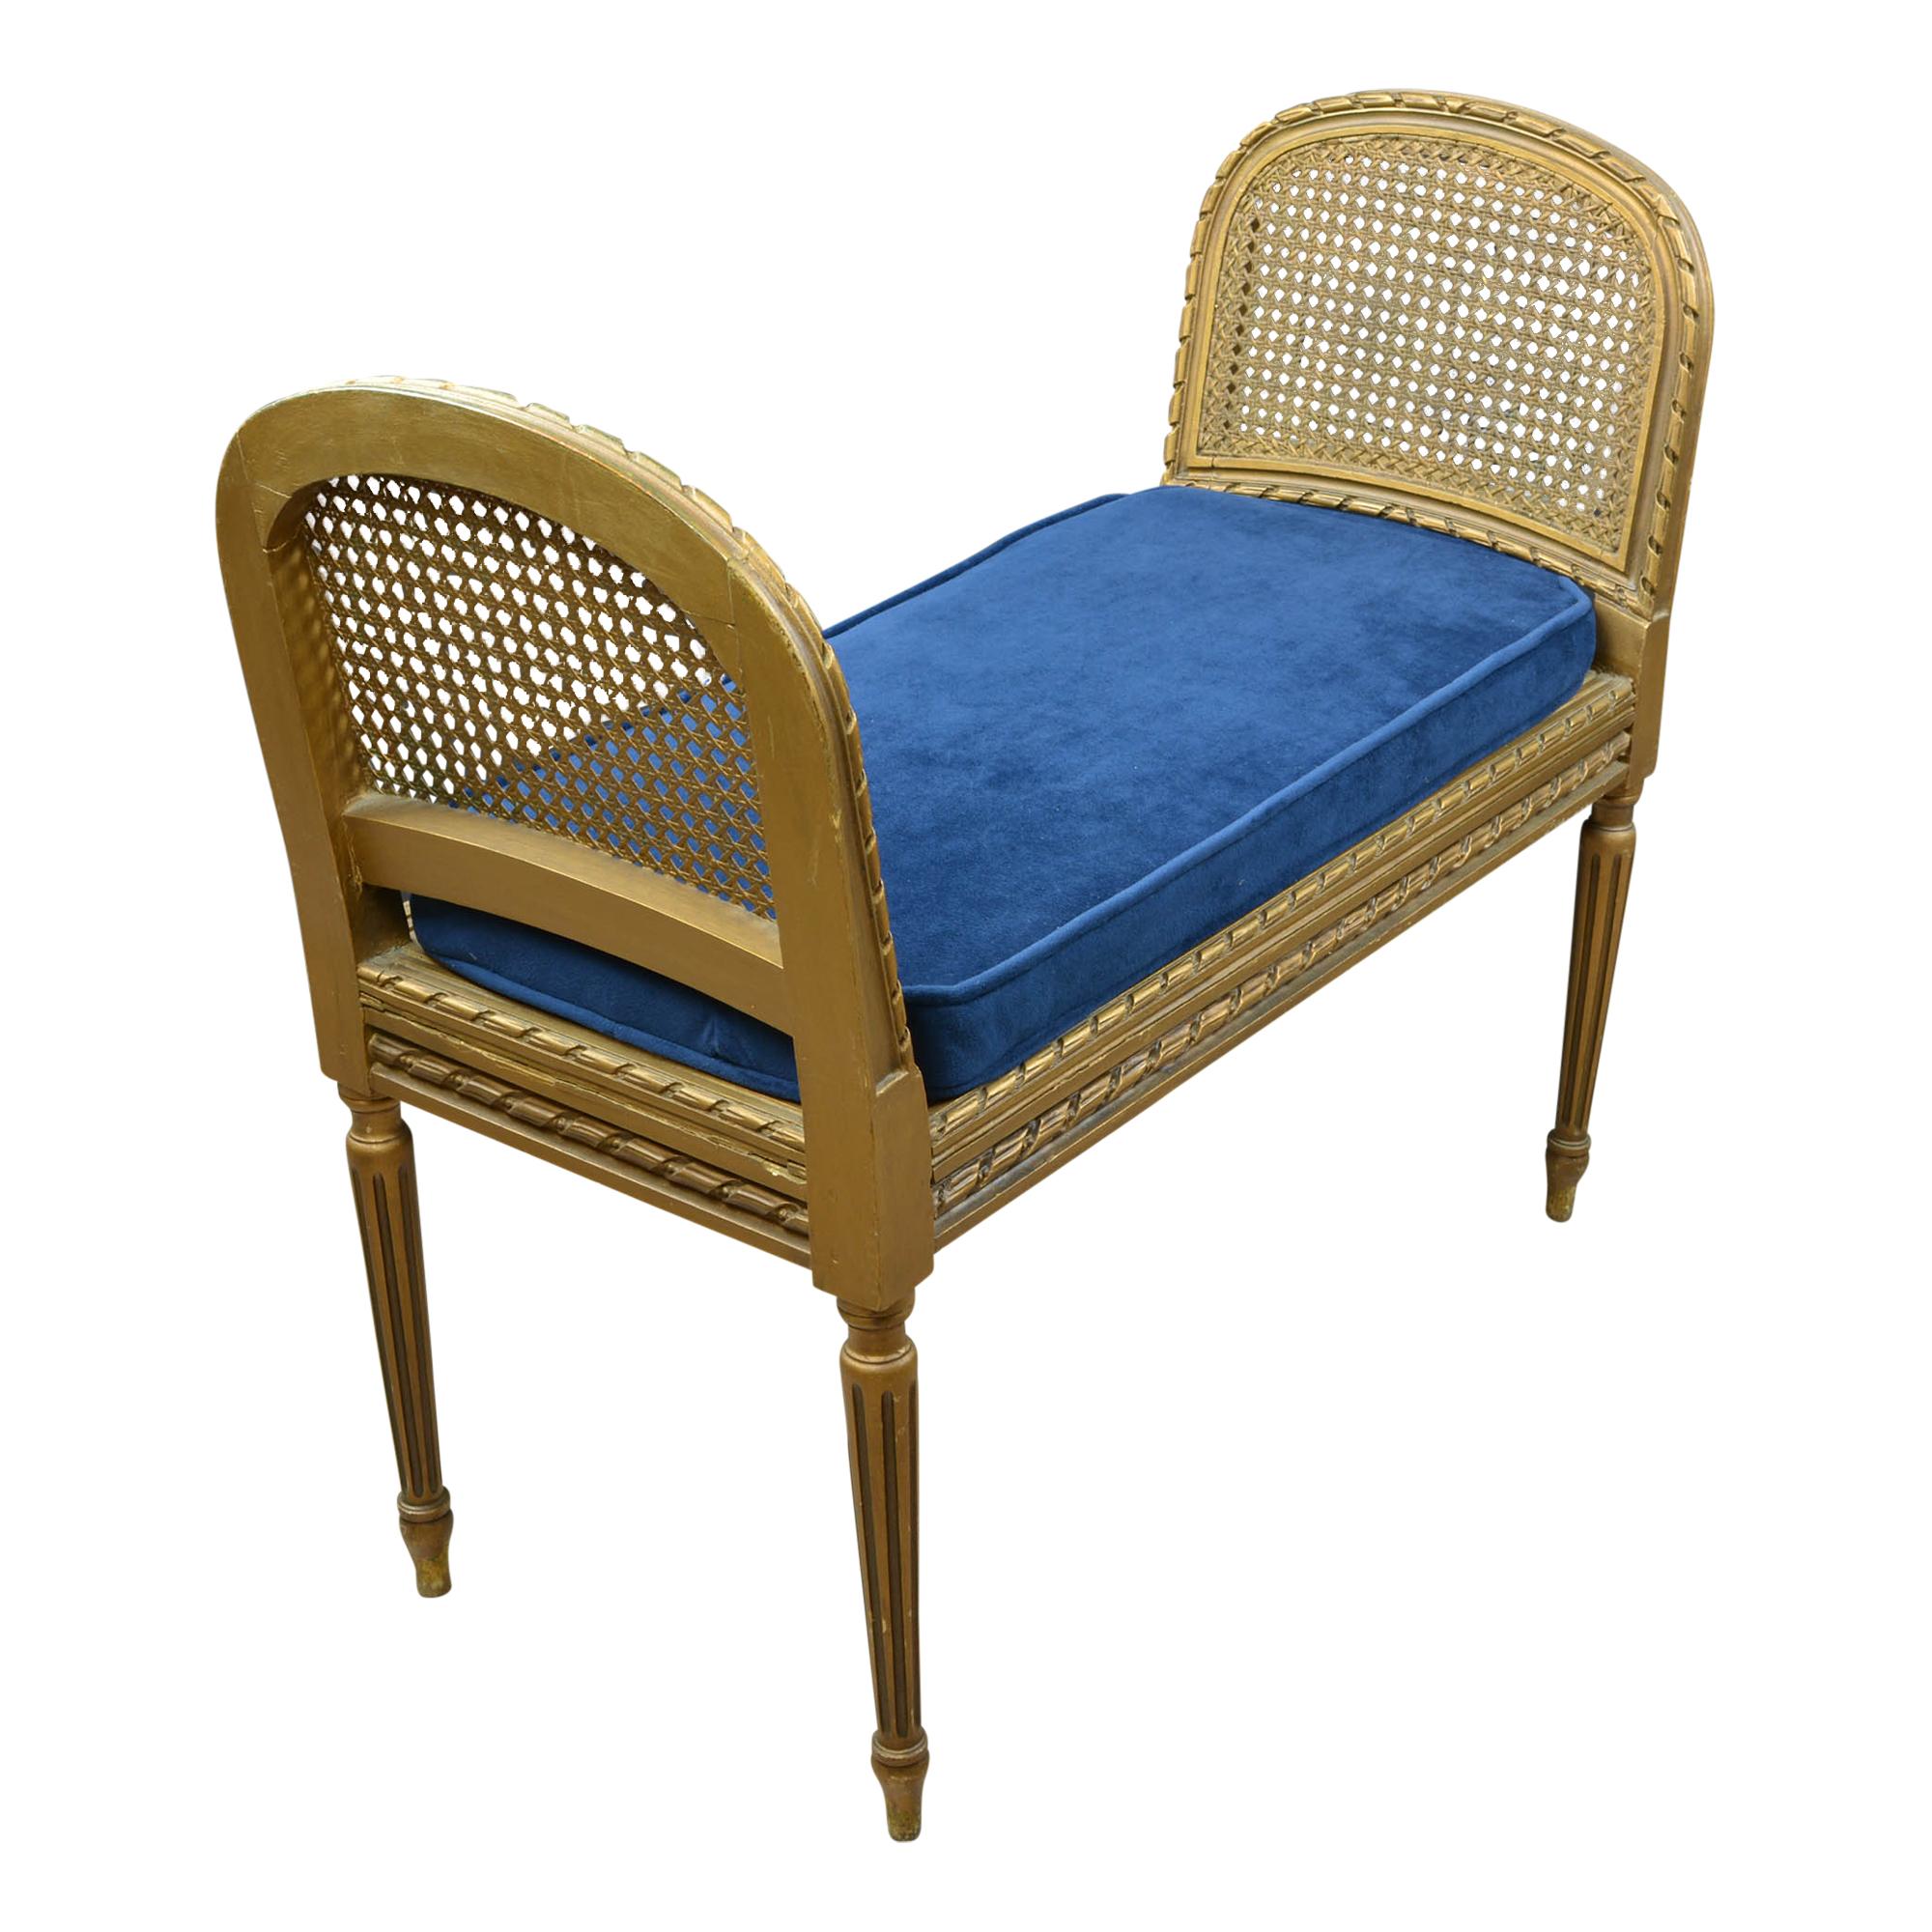 Victorian Antique Giltwood Caned Seat Raised Sides Bench Blue Velvet Cushion For Sale